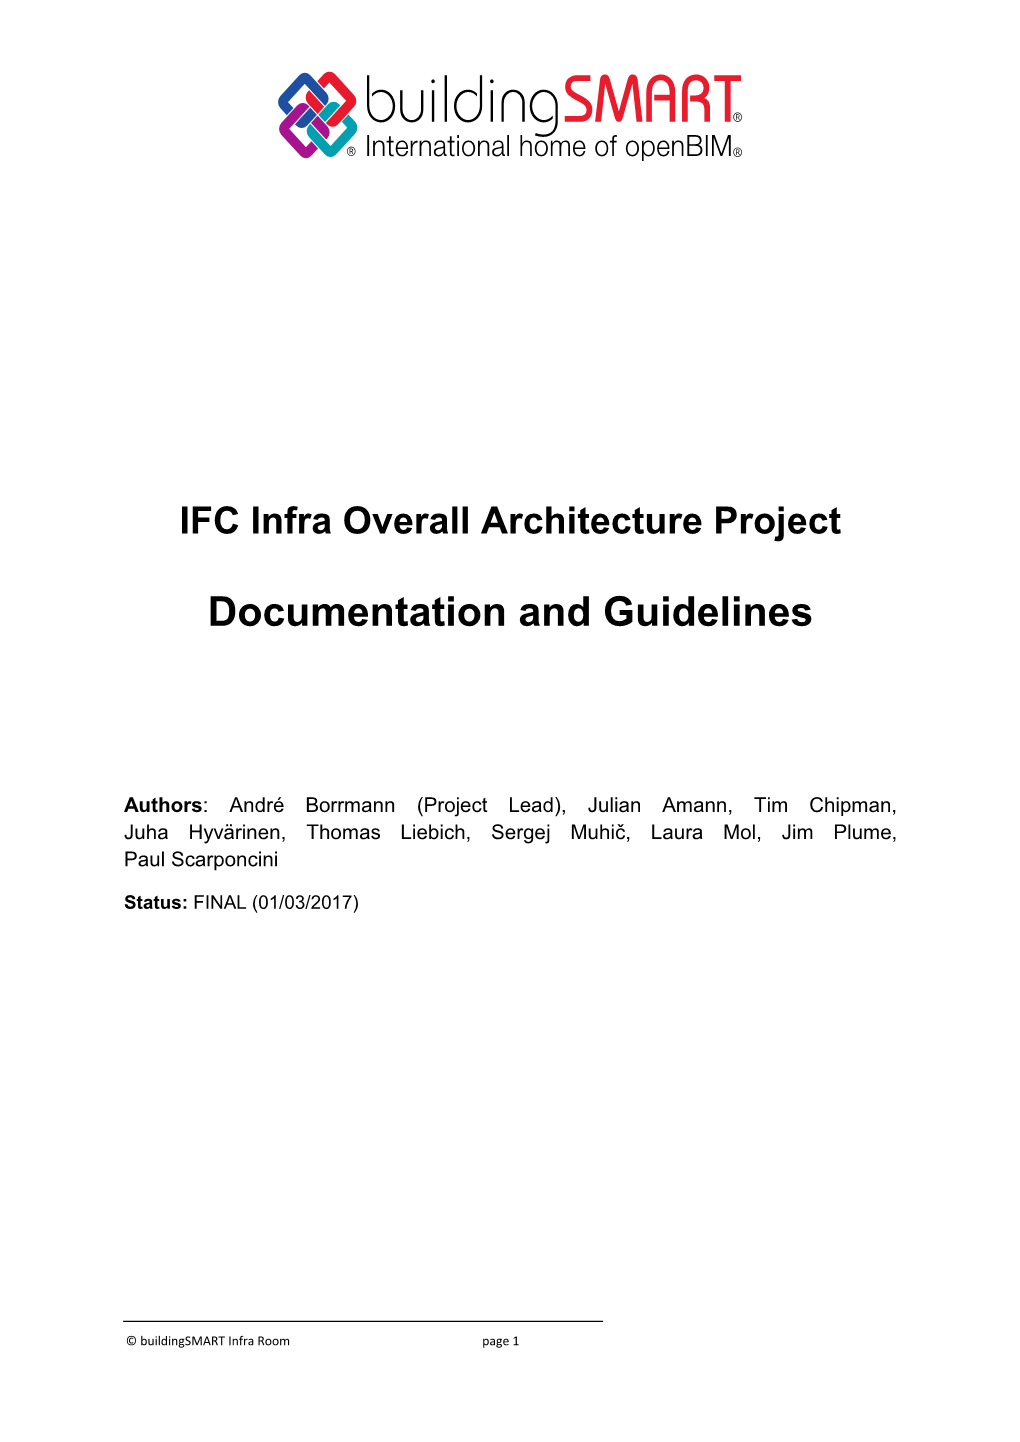 IFC Infra Overall Architecture Project Documentation and Guidelines